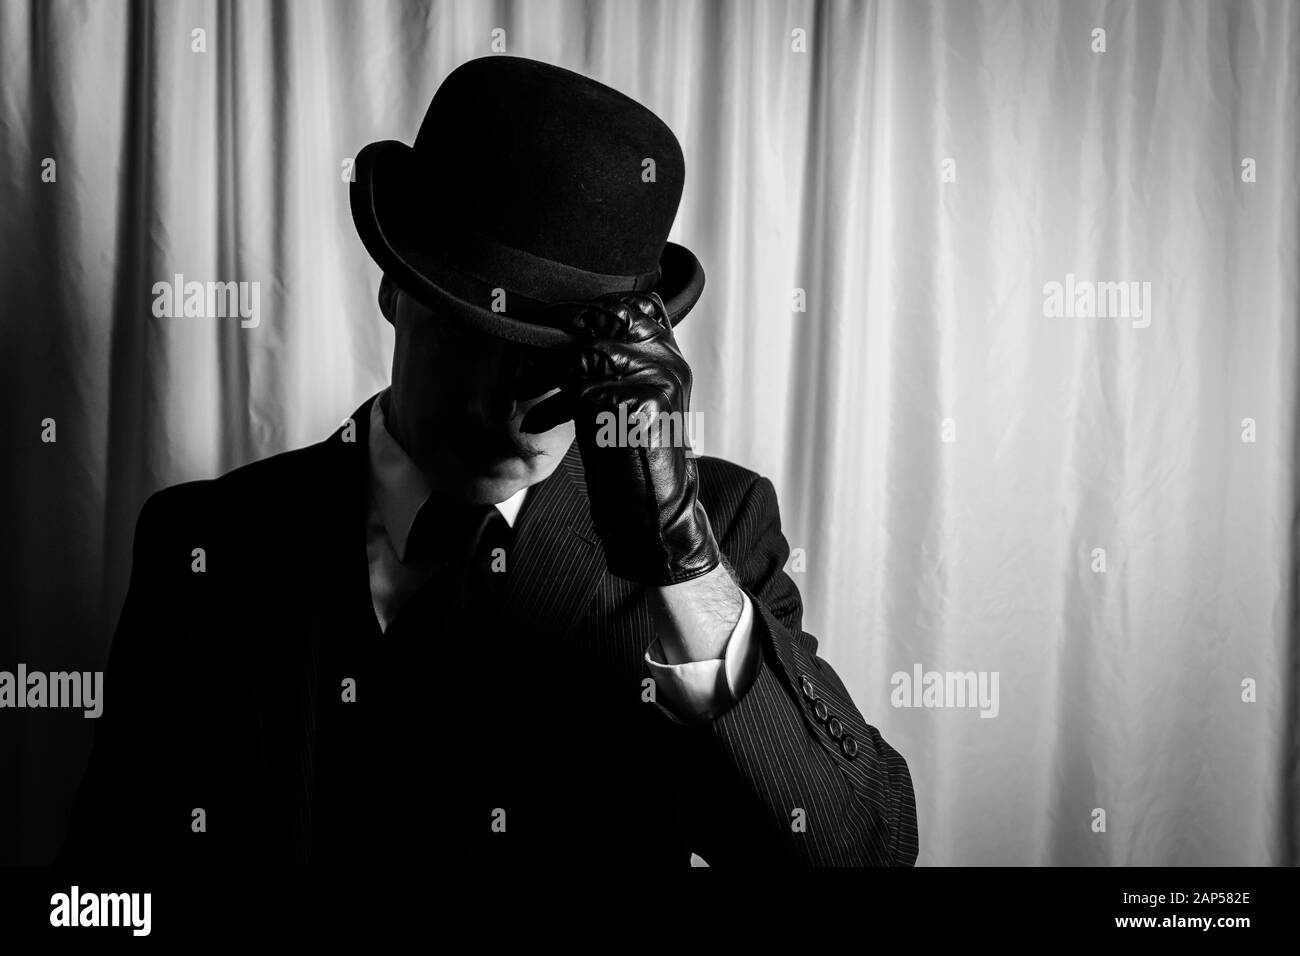 Portrait of Man in Dark Suit and Leather Gloves Doffing Bowler Hat. Concept of Classic and Eccentric British Gentleman. Retro Fashion. Stock Photo